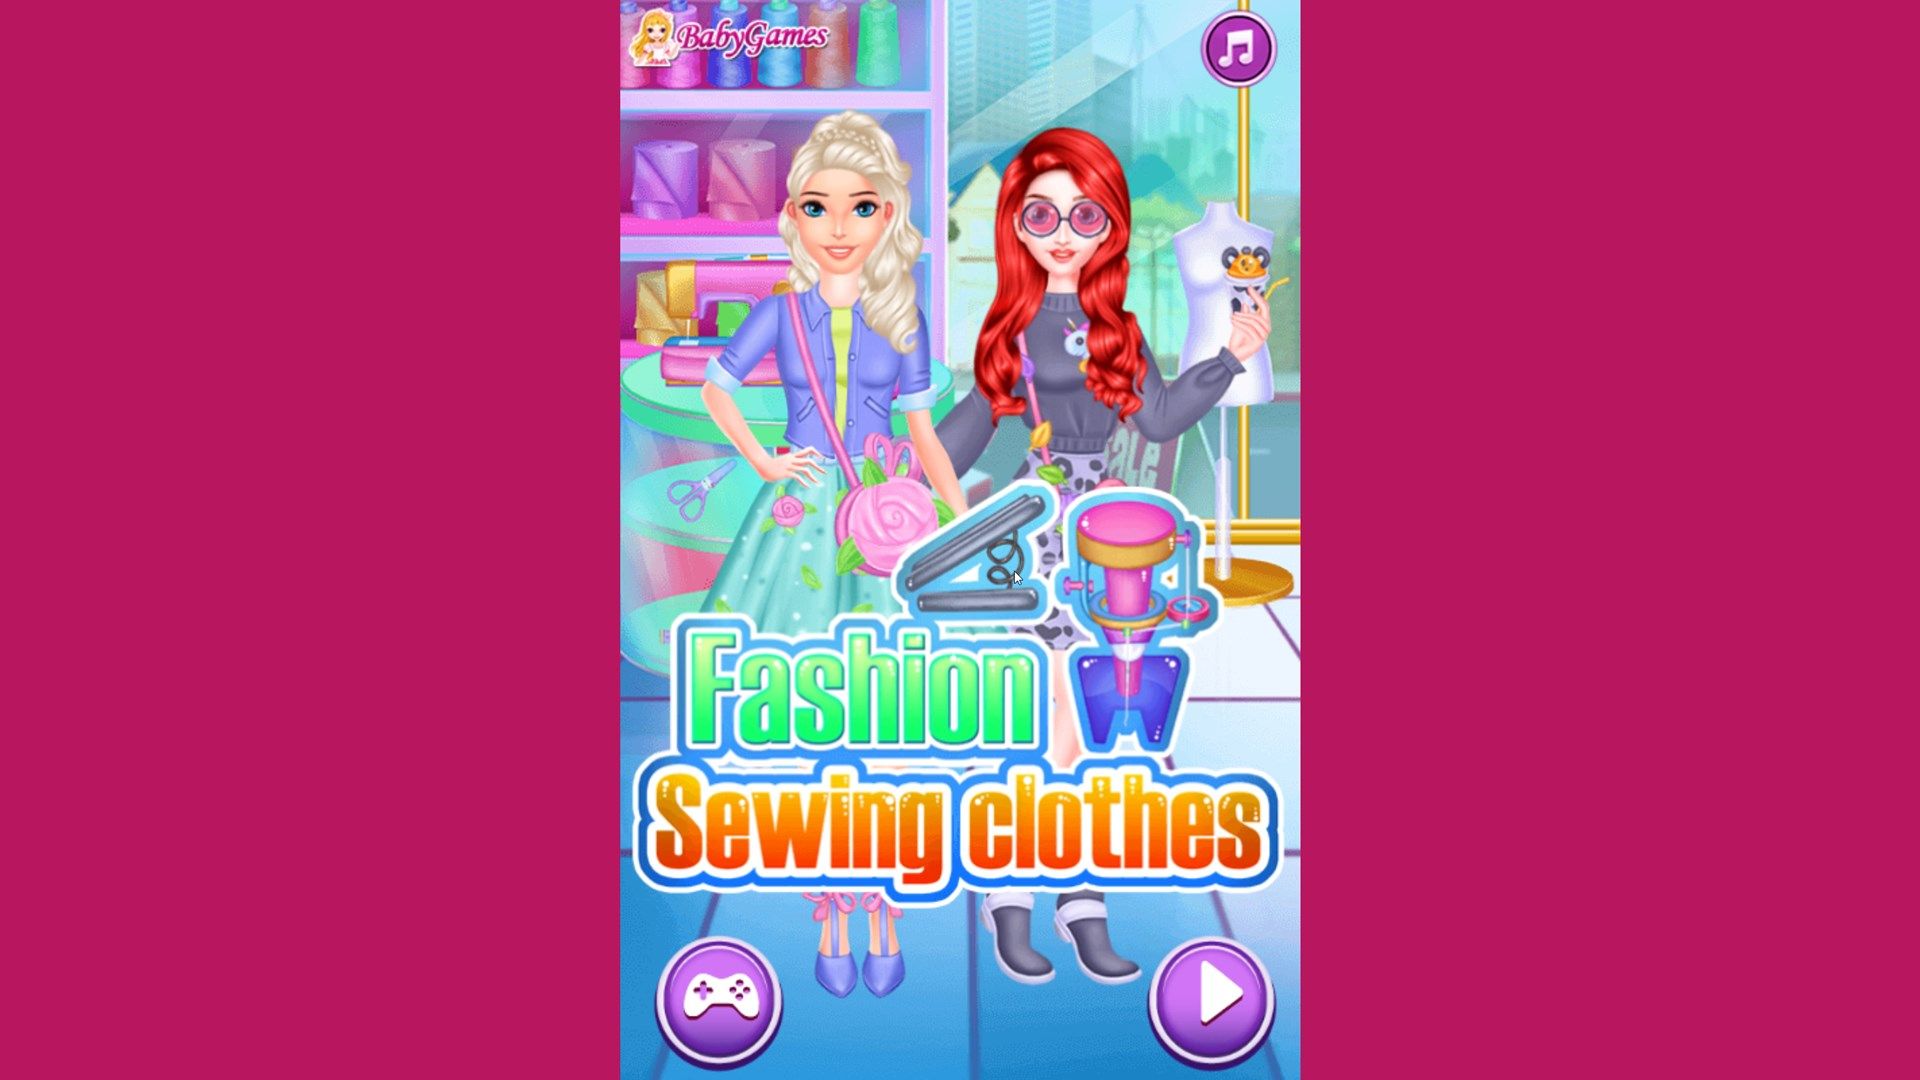 Fashion Sewing Clothes